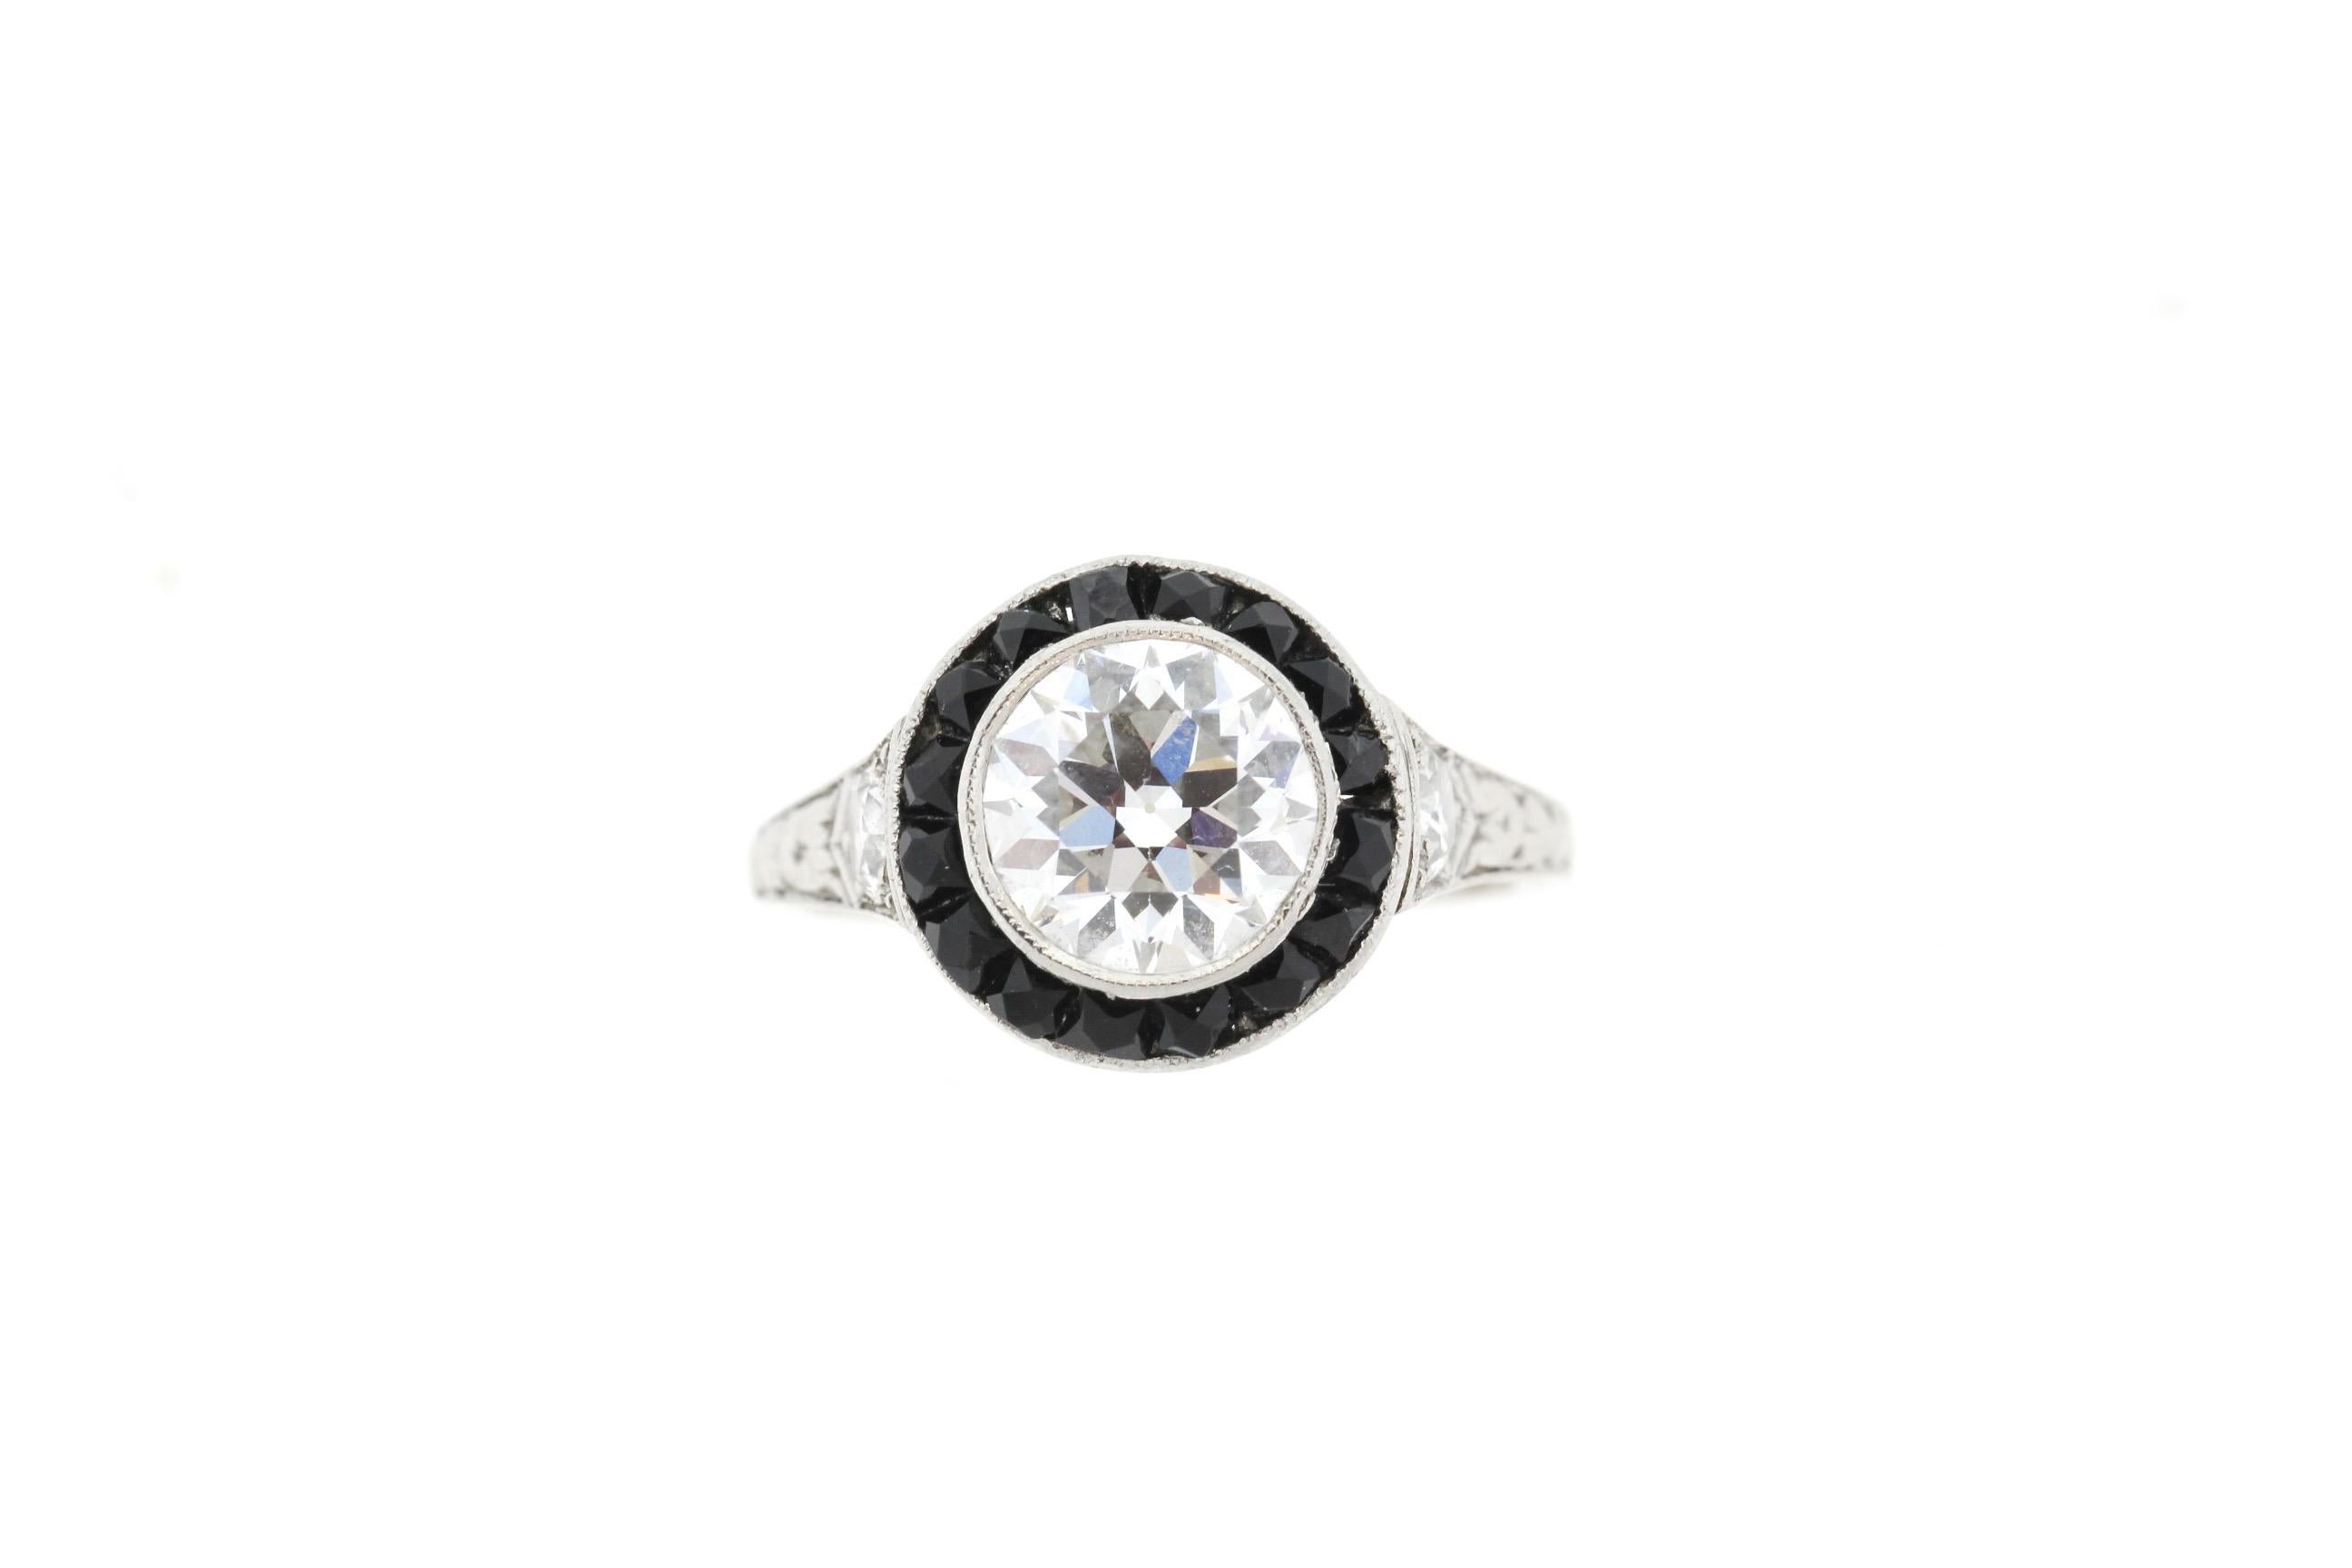 A gorgeous Art Deco example of a onyx and diamond halo ring, circa 1920. The ring centers on an Old European Cut diamond weighing approximately 1.15 carats (by formula). The diamond in our estimation is a G to H color and VS 1 or 2 clarity. It is a